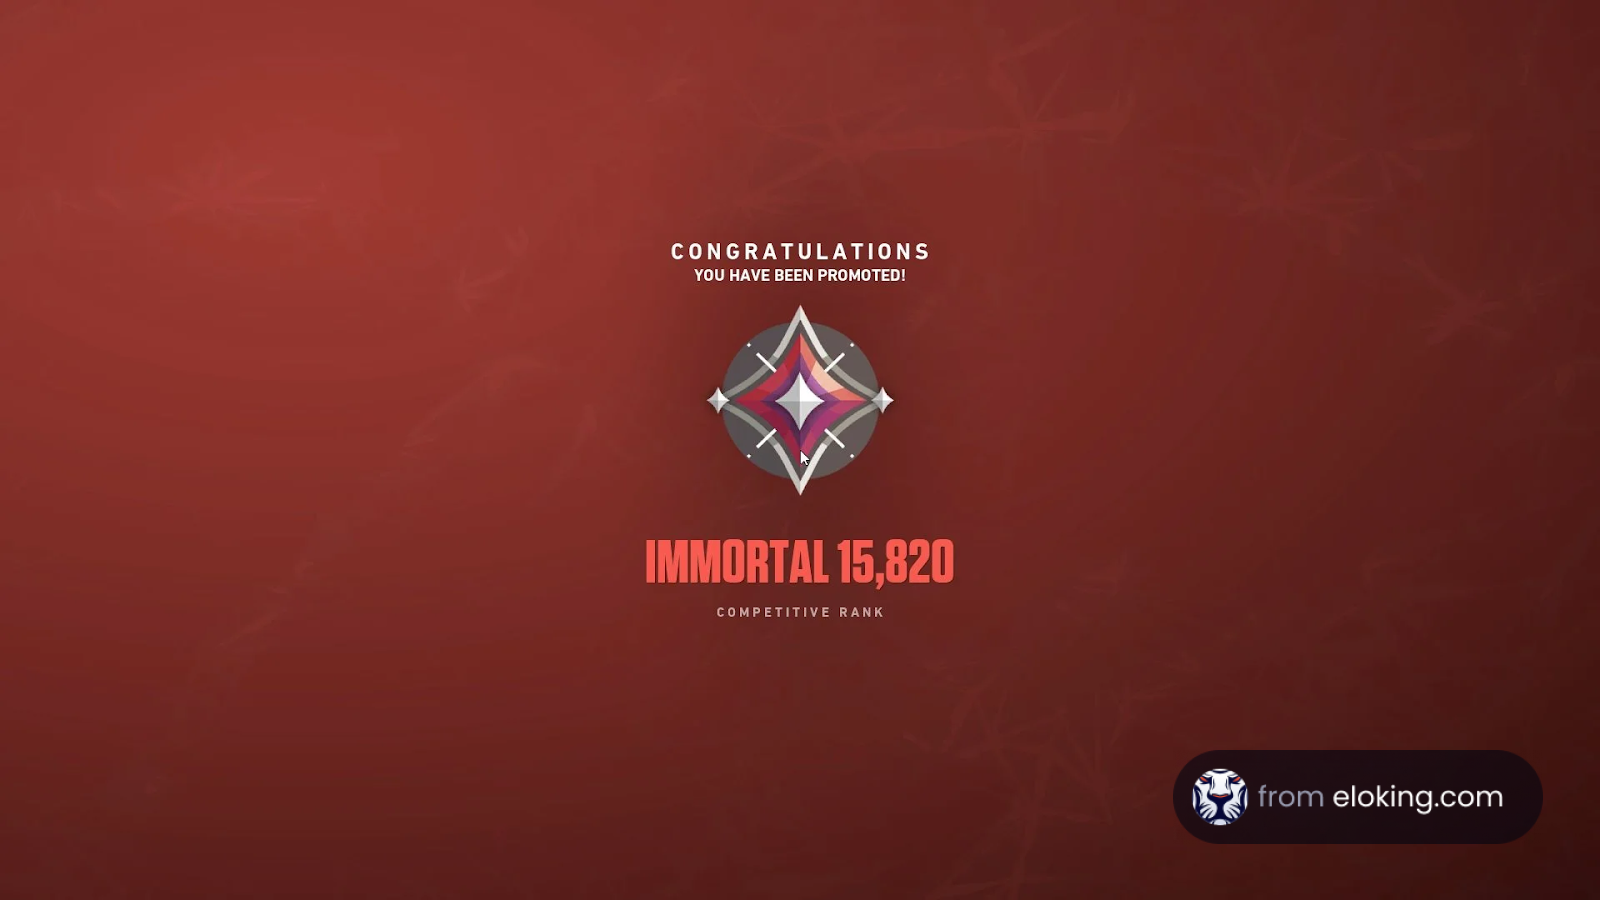 Gaming promotion screen congratulating a new Immortal rank with a score of 15,820